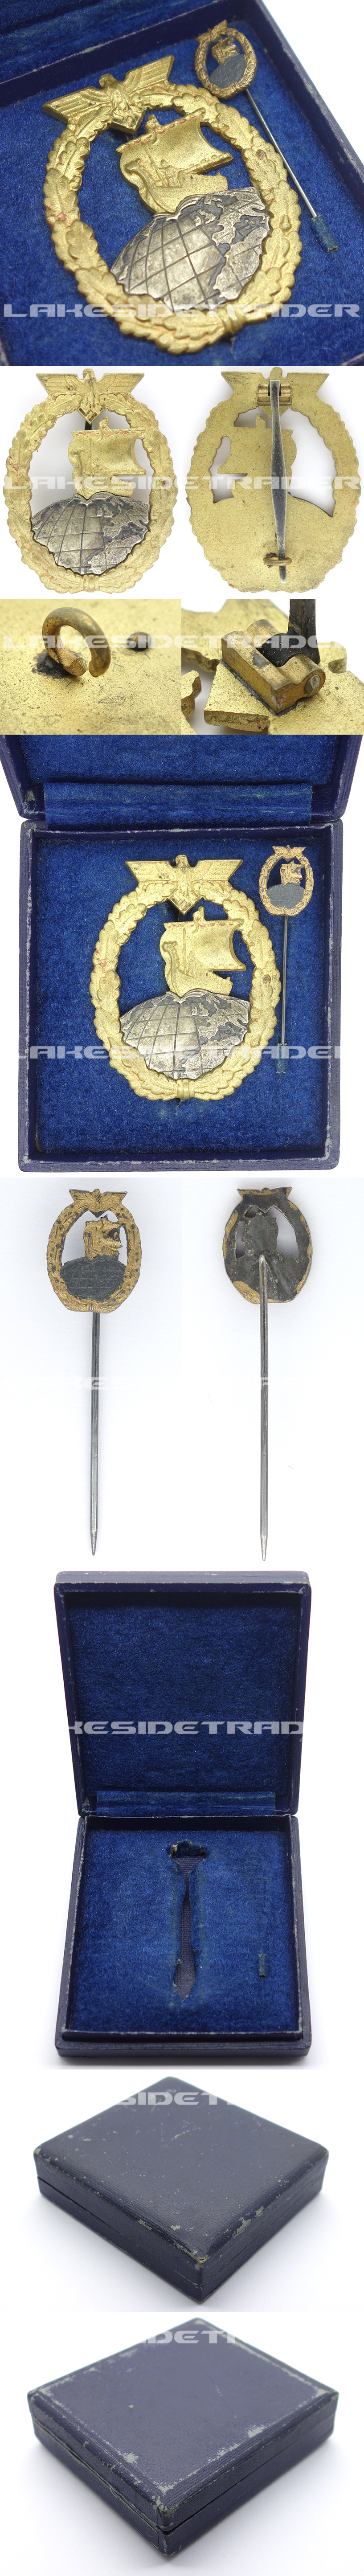 Cased Auxiliary Cruiser Badge and Miniature